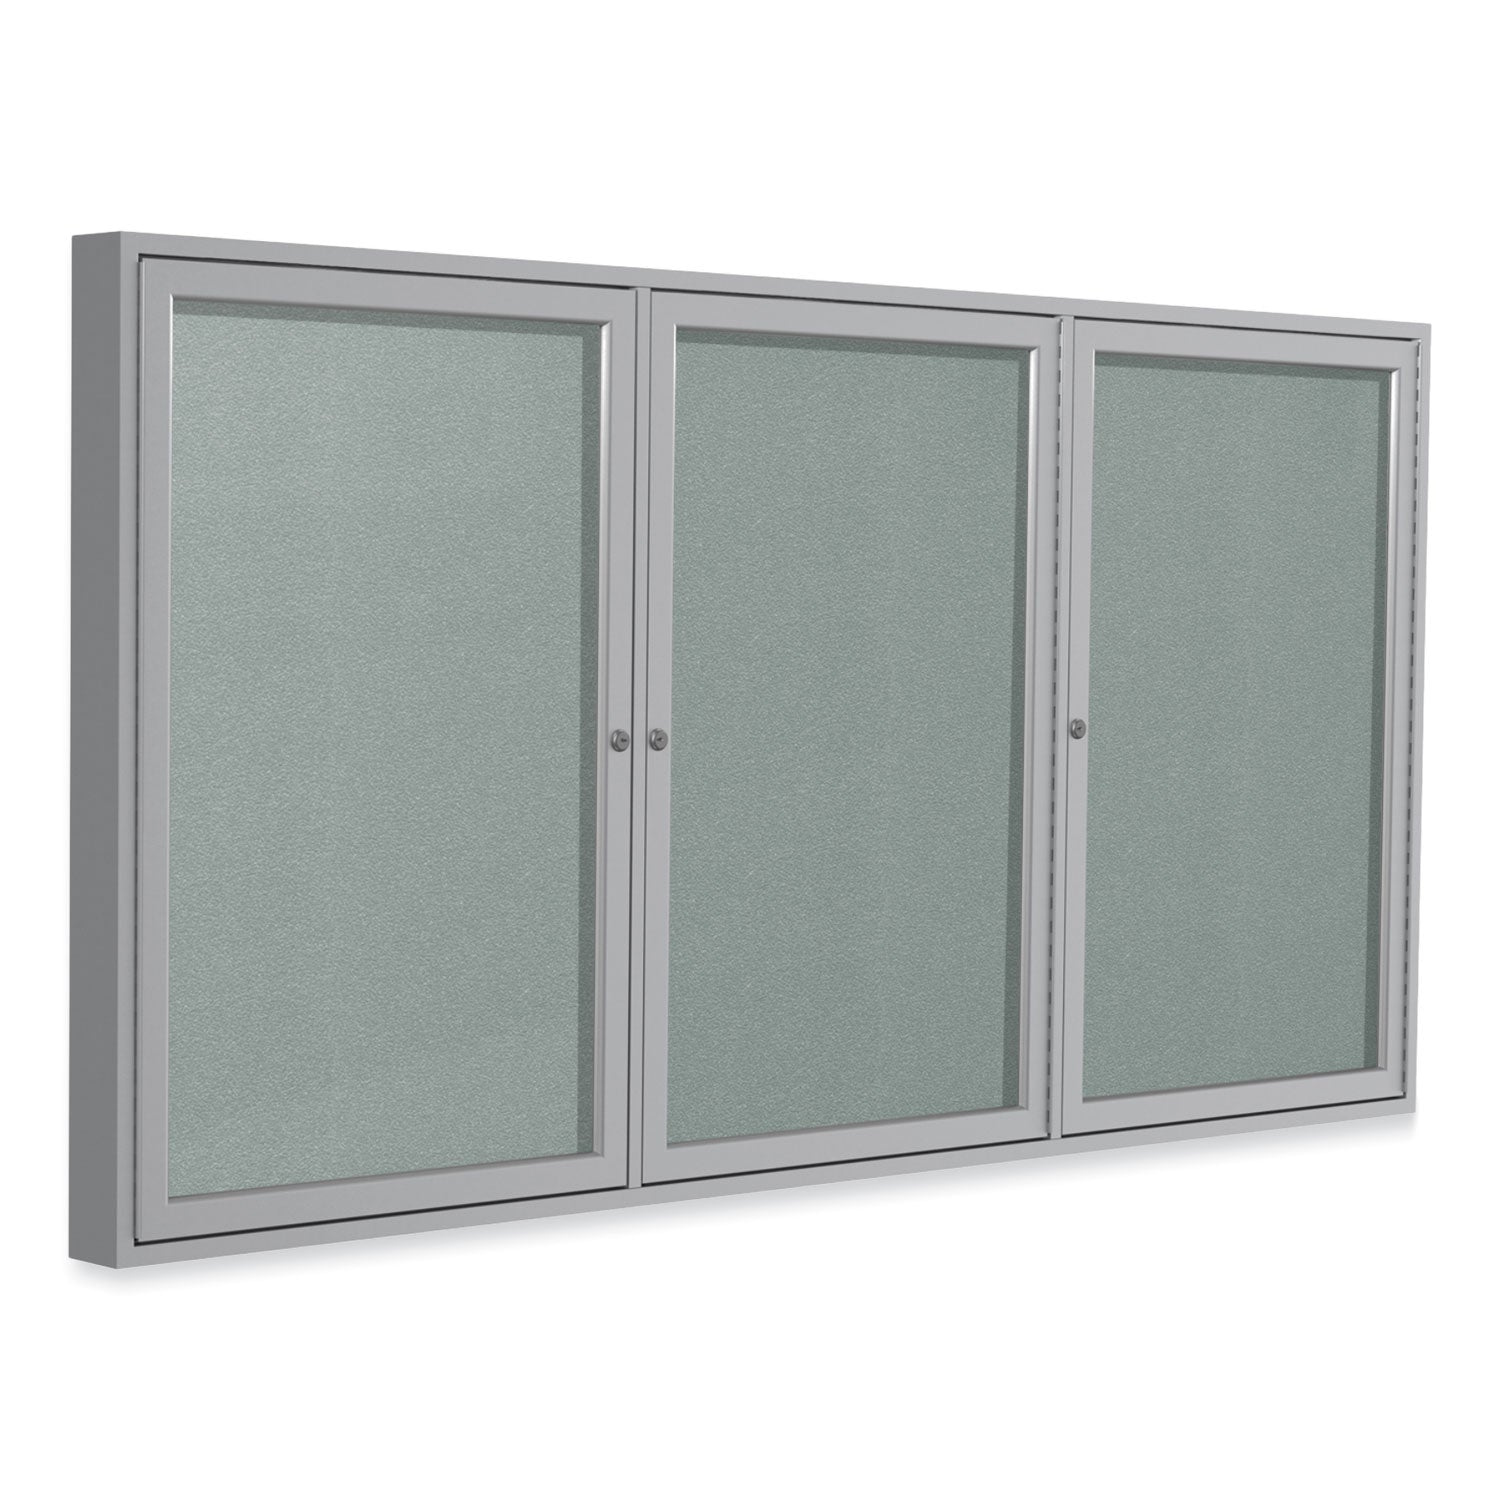 enclosed-outdoor-bulletin-board-72-x-36-silver-surface-satin-aluminum-frame-ships-in-7-10-business-days_ghepa33672vx193 - 1